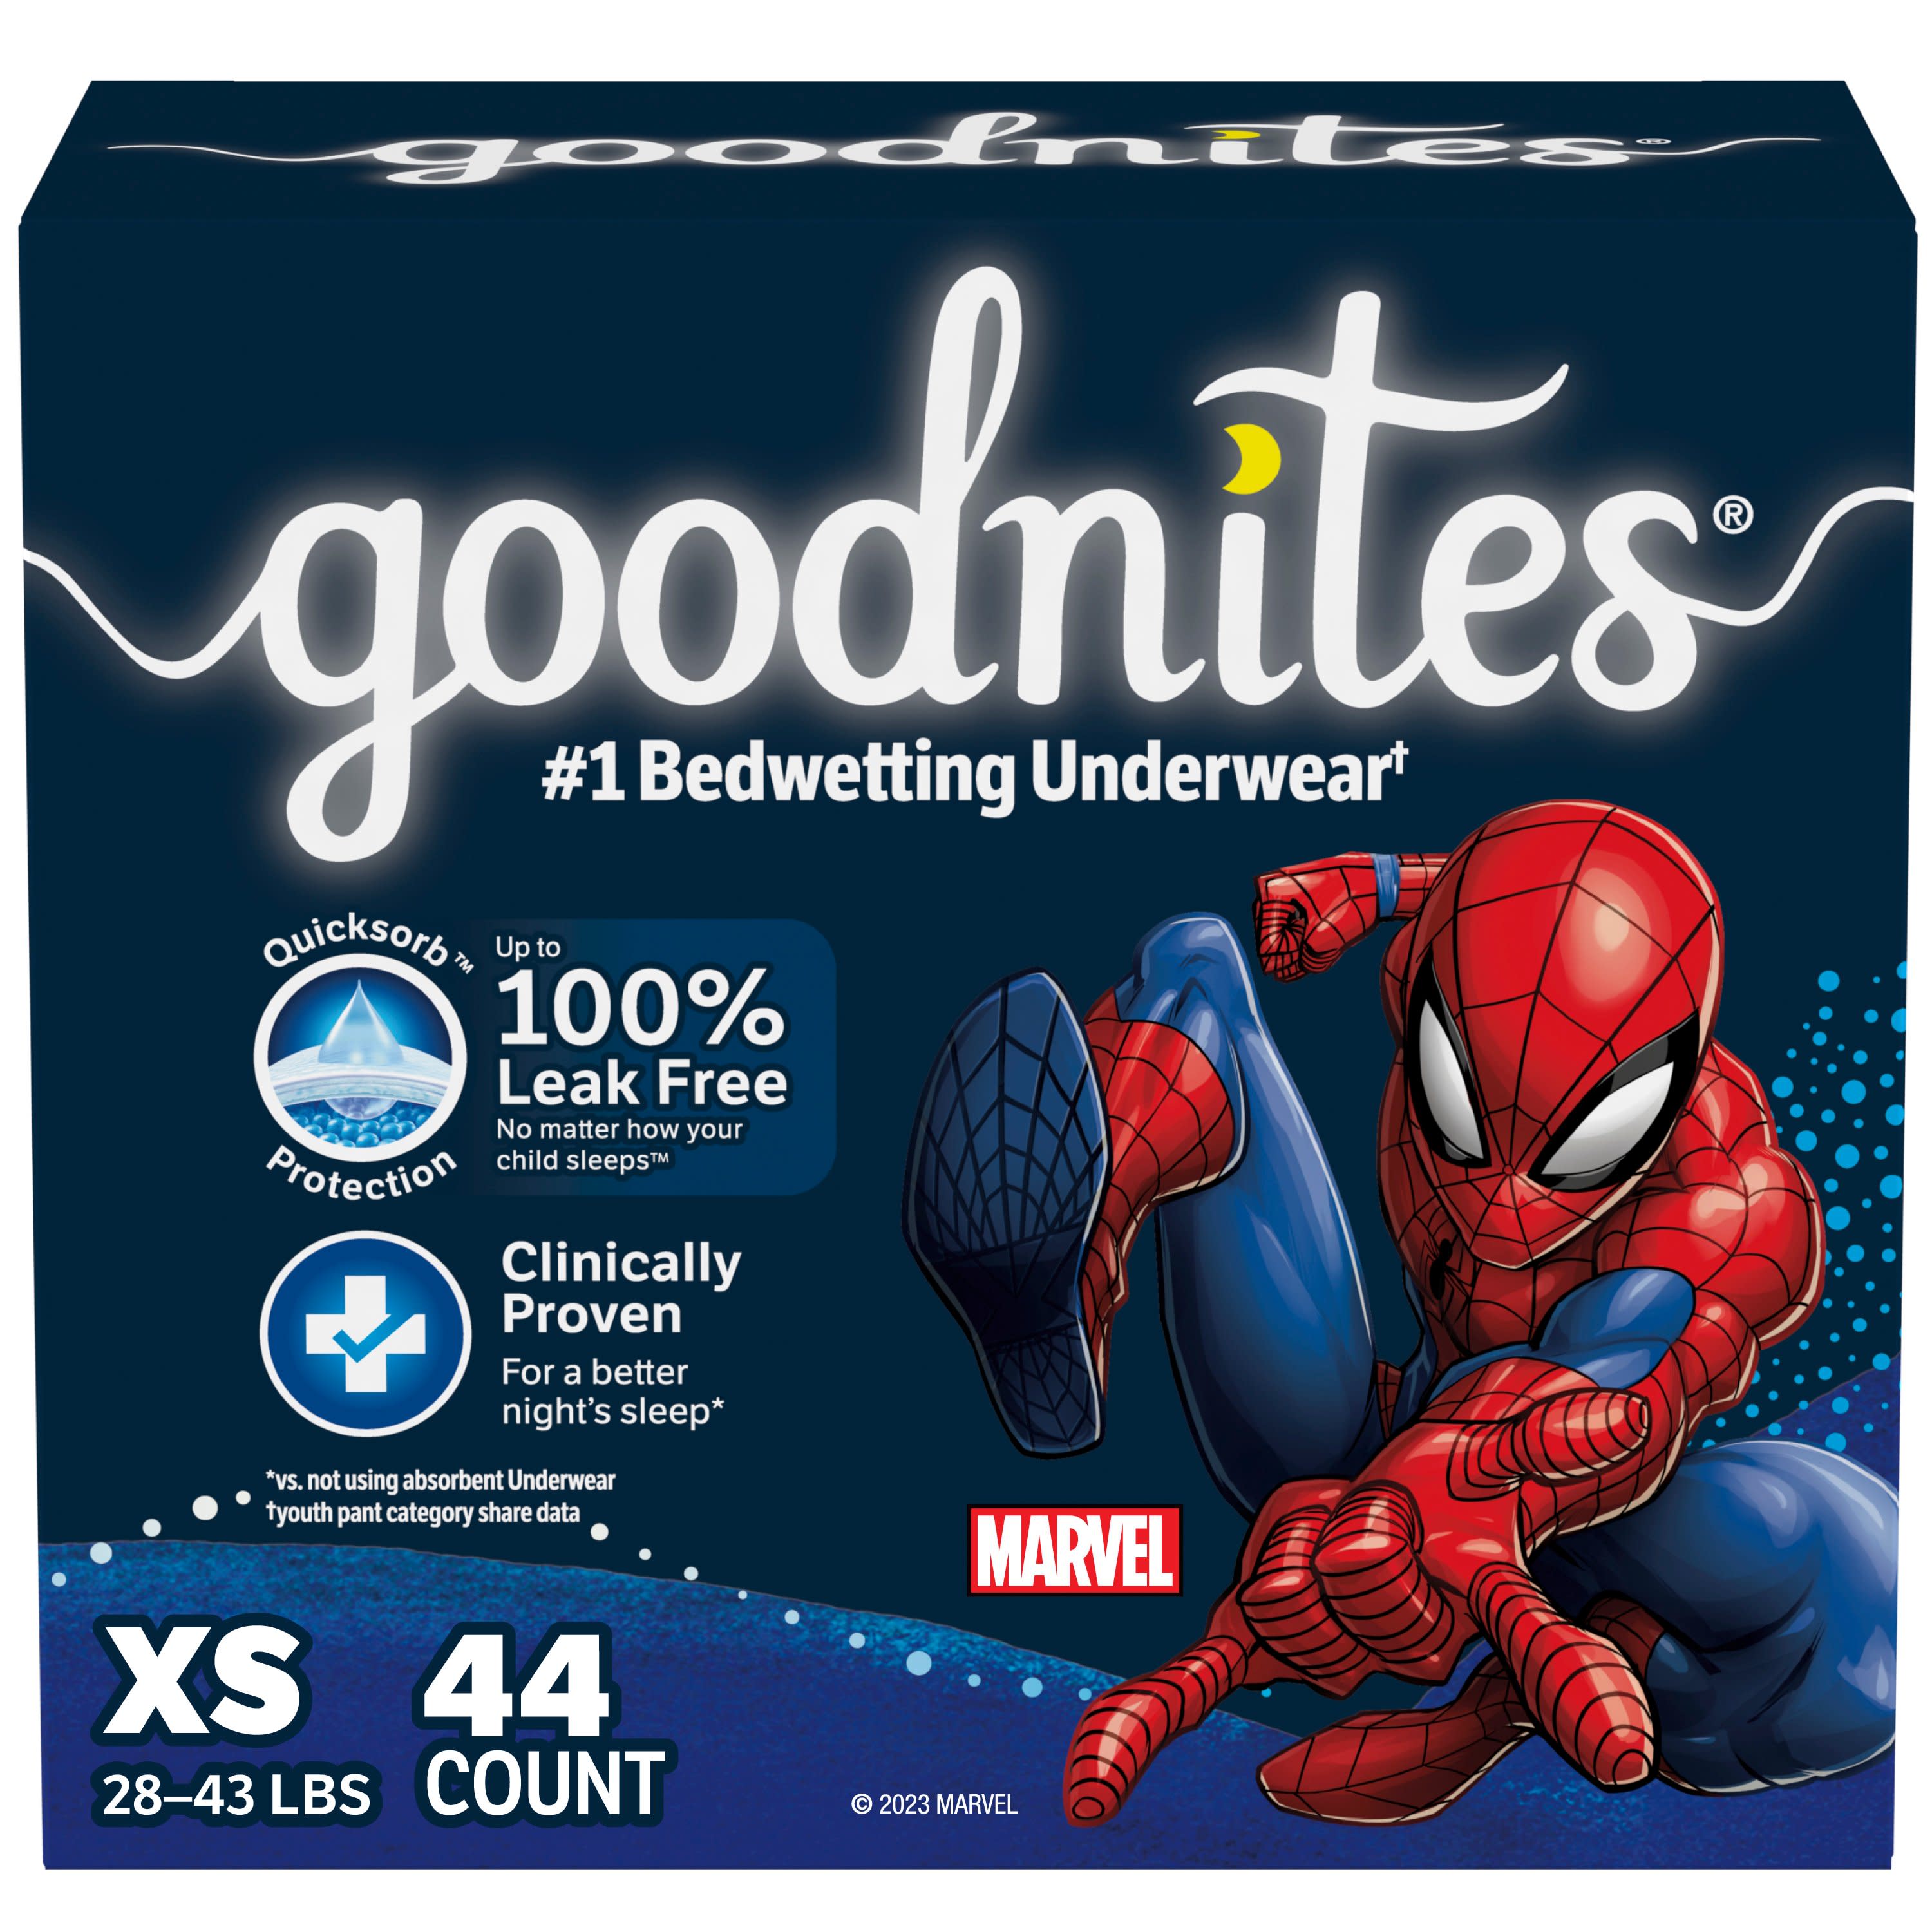 Goodnites Nighttime Bedwetting Underwear for Boys, XS, 44 Ct (Select for More Options) - image 3 of 10